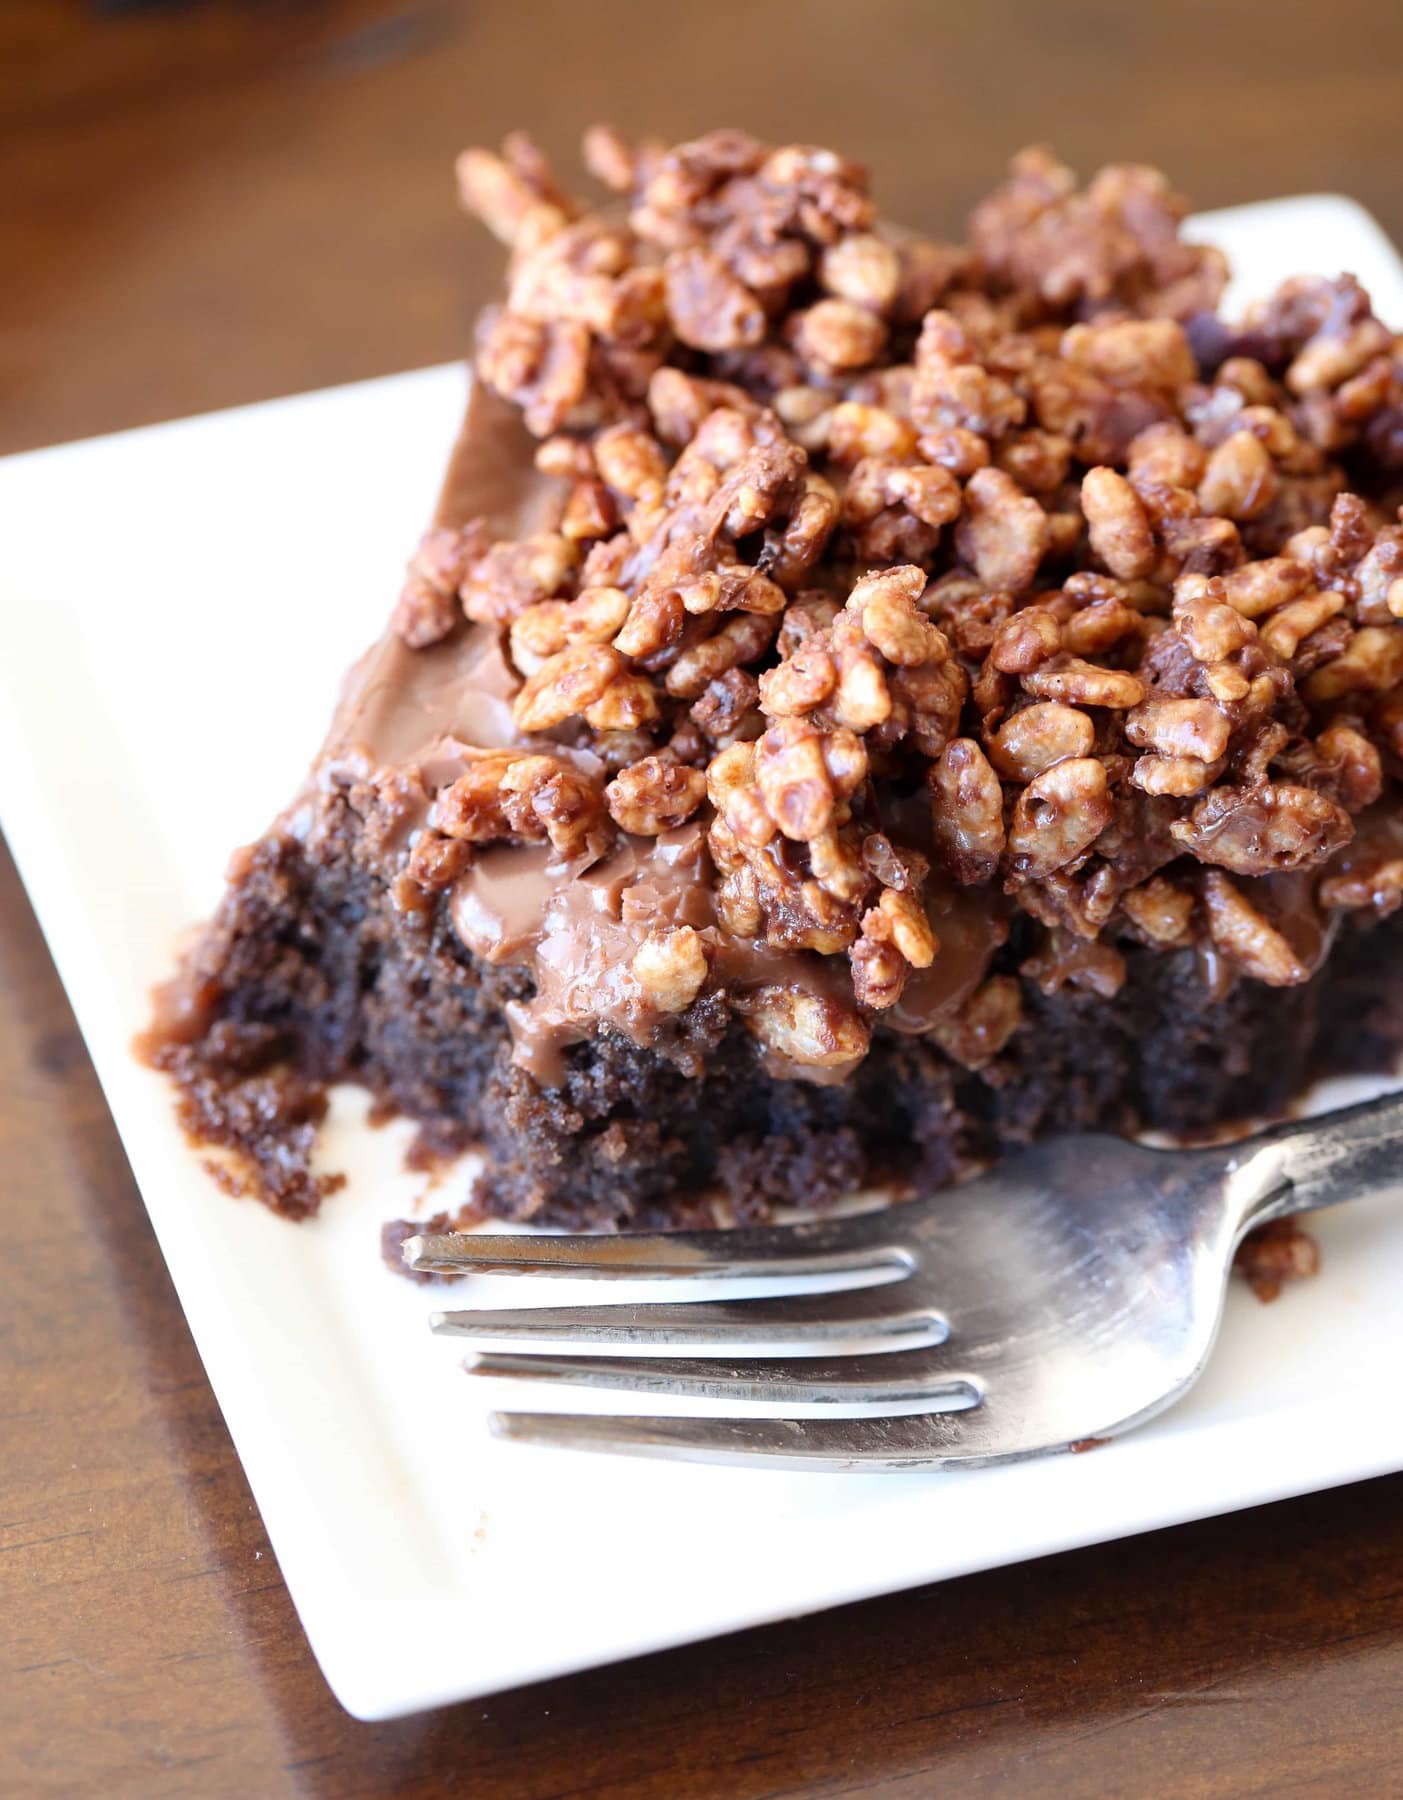 Slice of Nutella cake with Nutella topping and crunch.